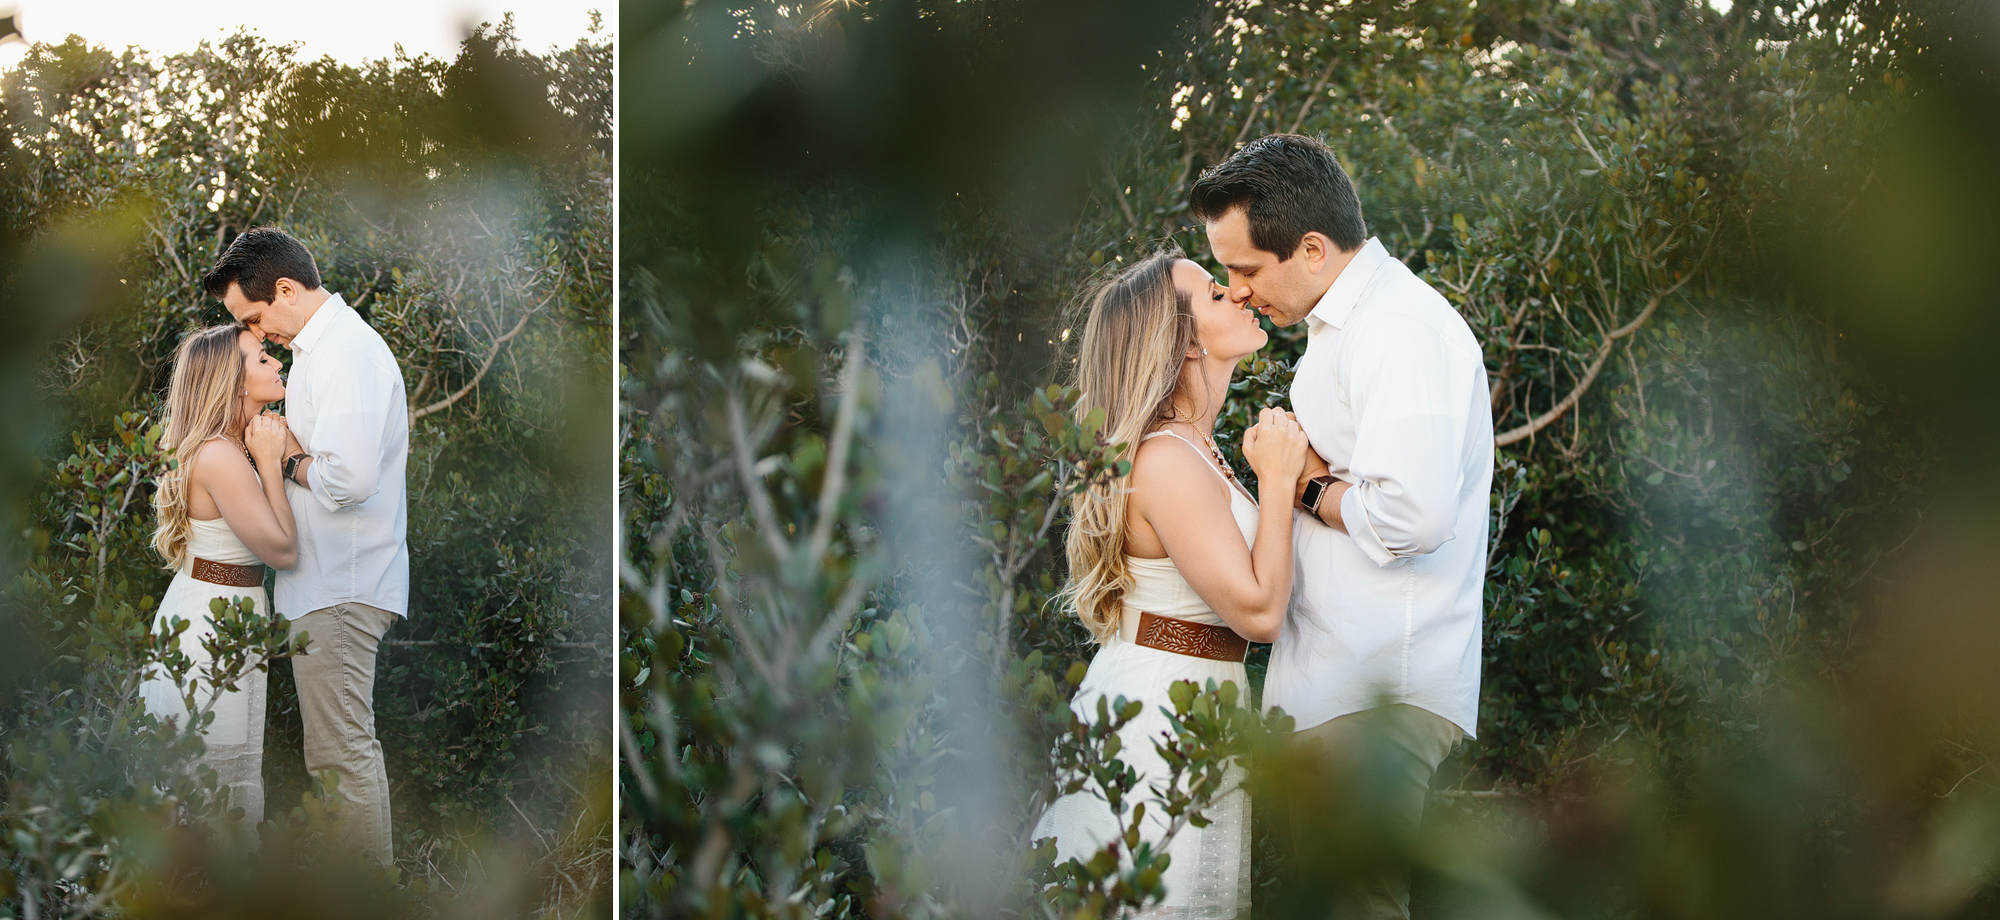 Sweet photos of the couple. 